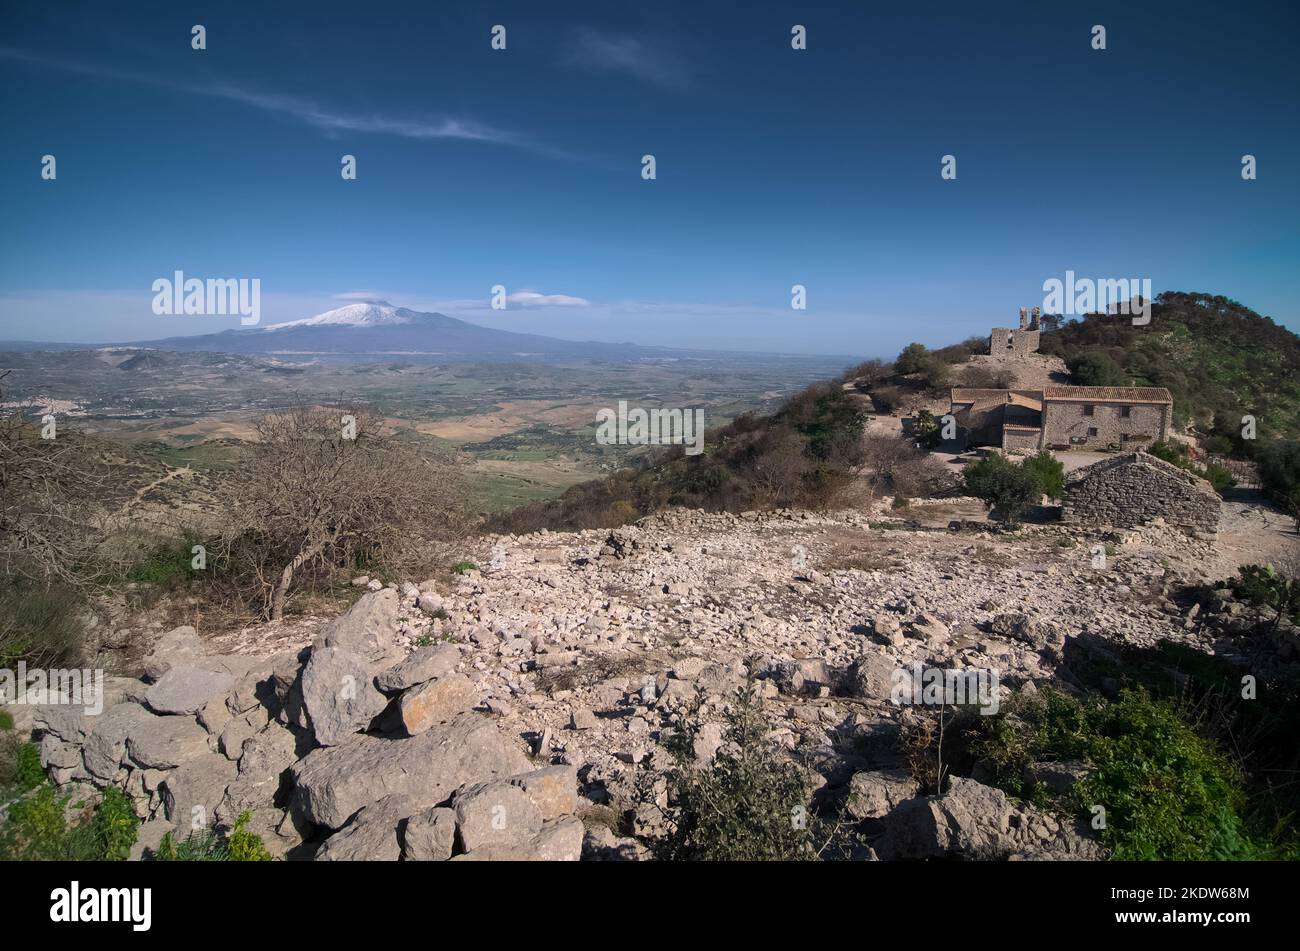 ruins on Mount Iudica and Mount Etna in Sicily, Italy Stock Photo